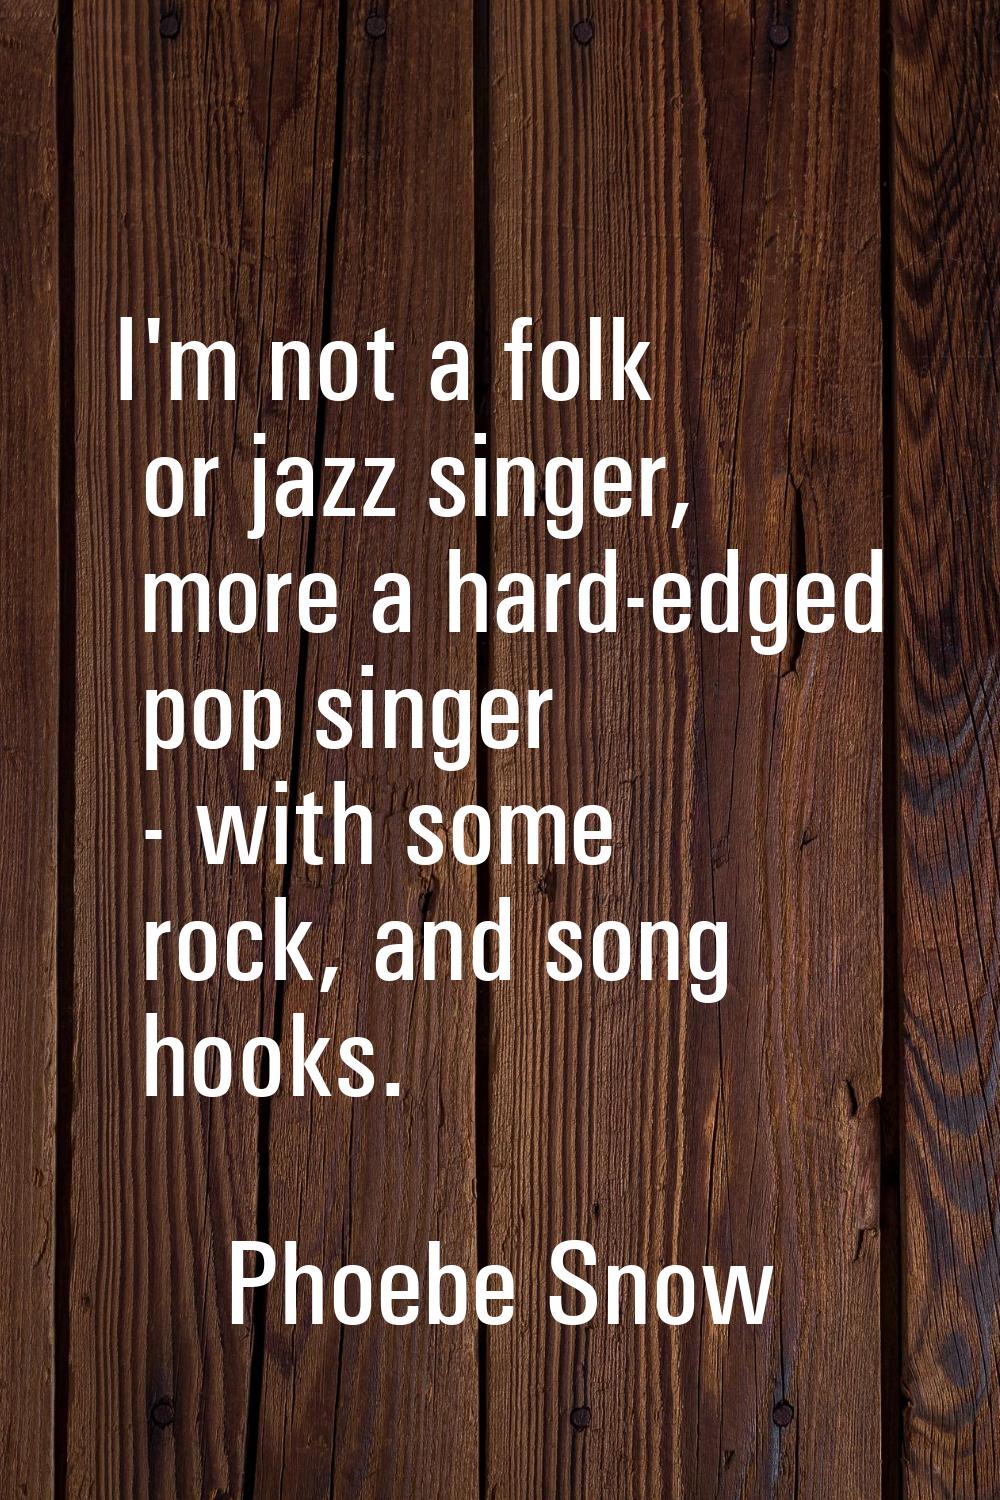 I'm not a folk or jazz singer, more a hard-edged pop singer - with some rock, and song hooks.